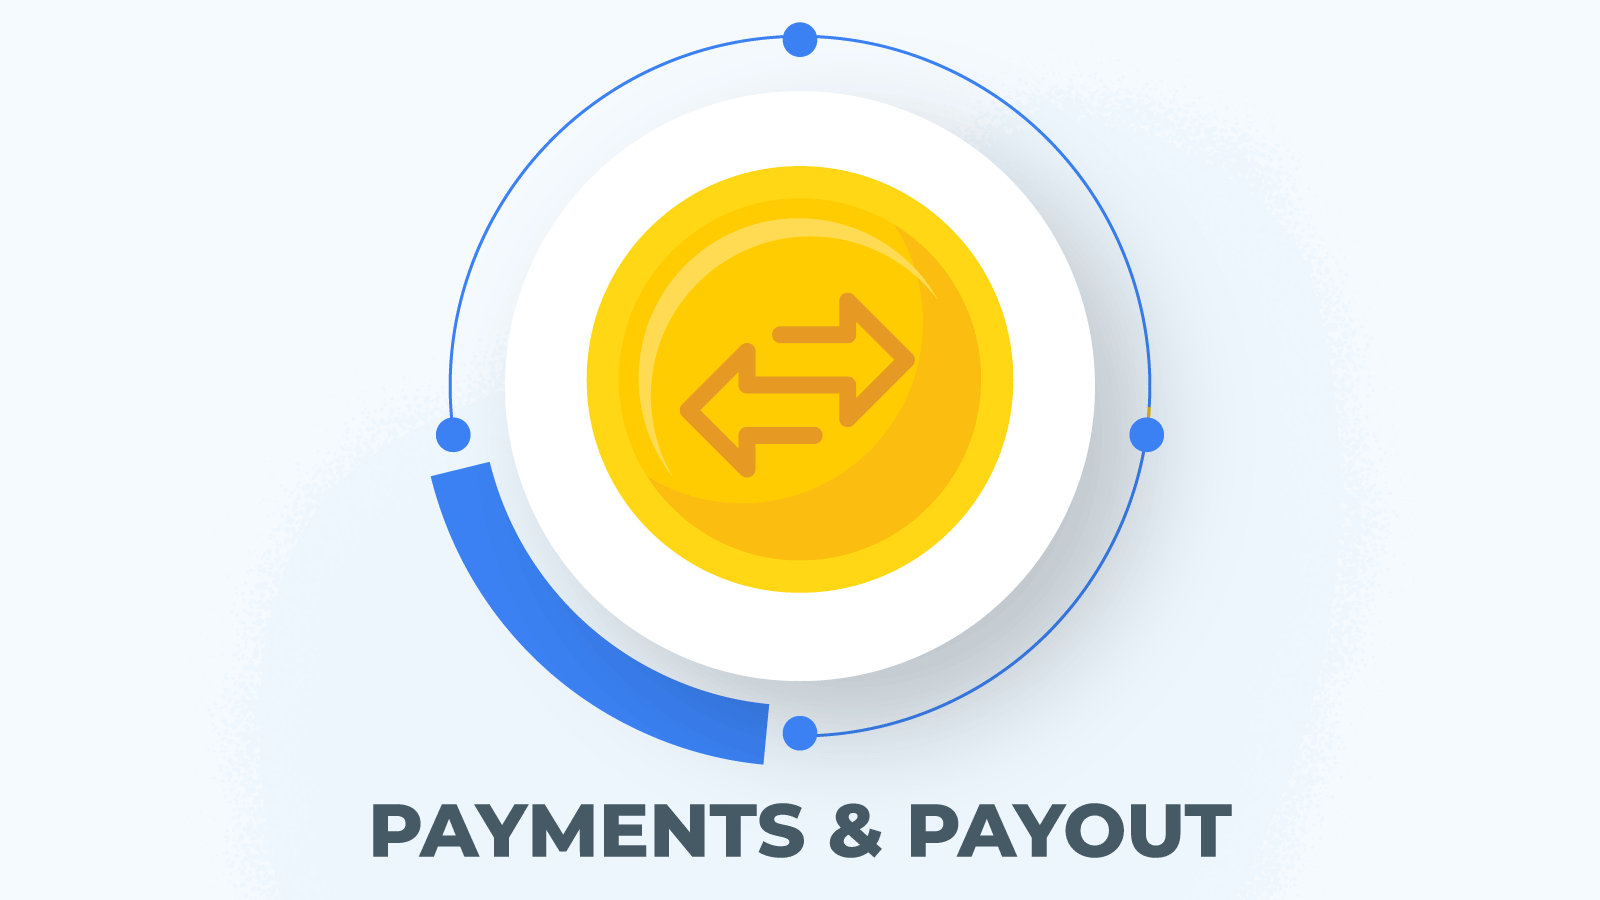 Payments & payout